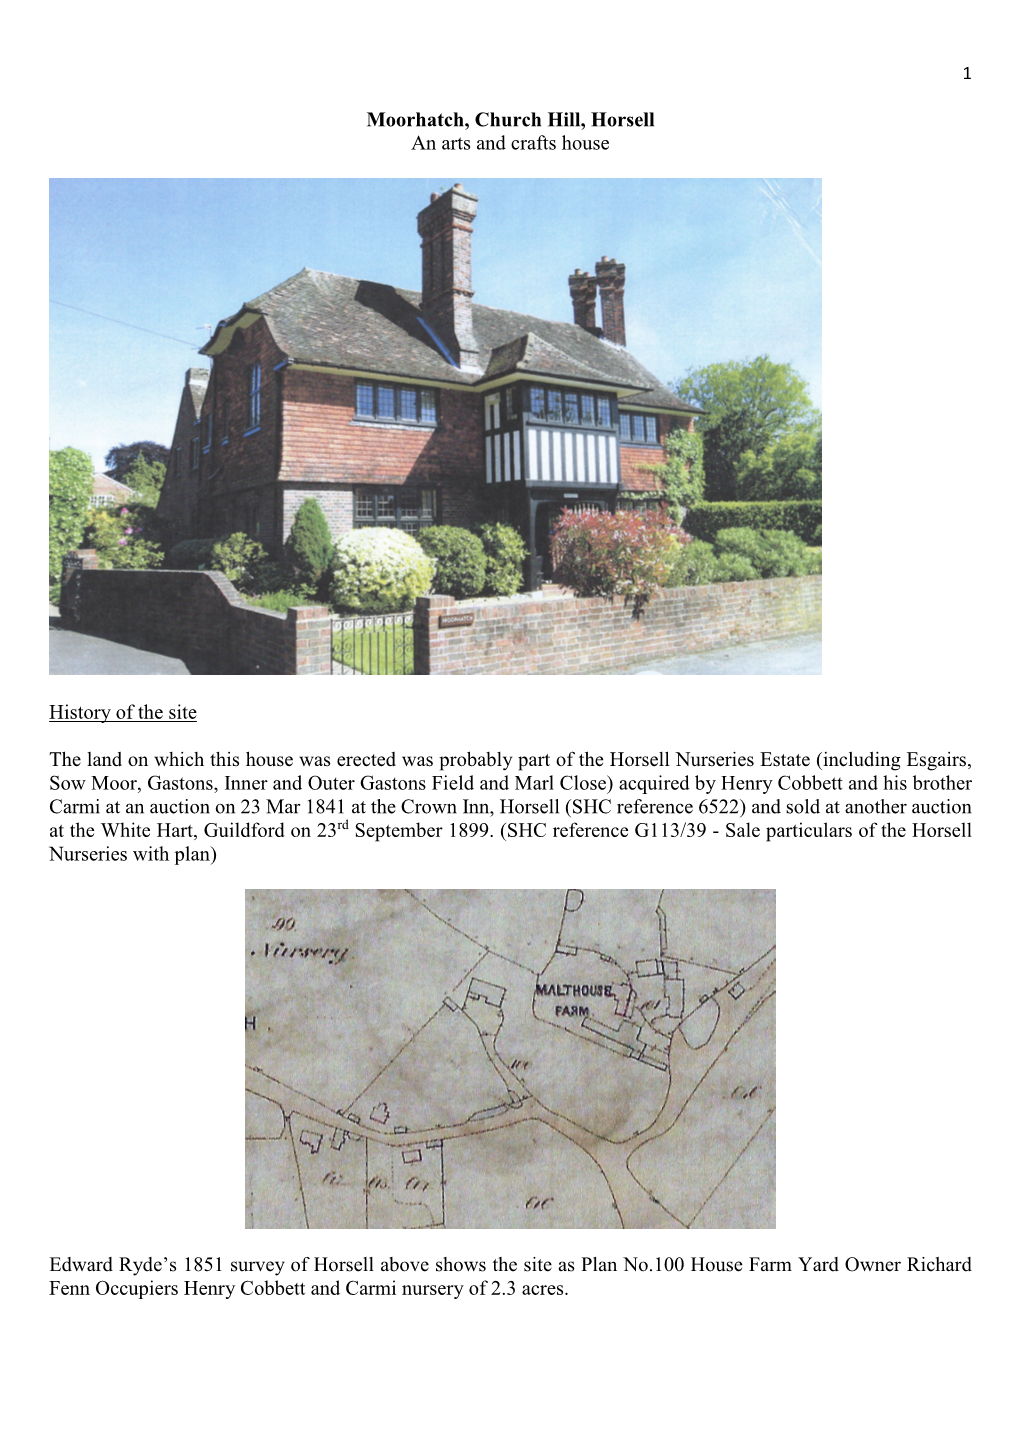 Moorhatch, Church Hill, Horsell an Arts and Crafts House History of The